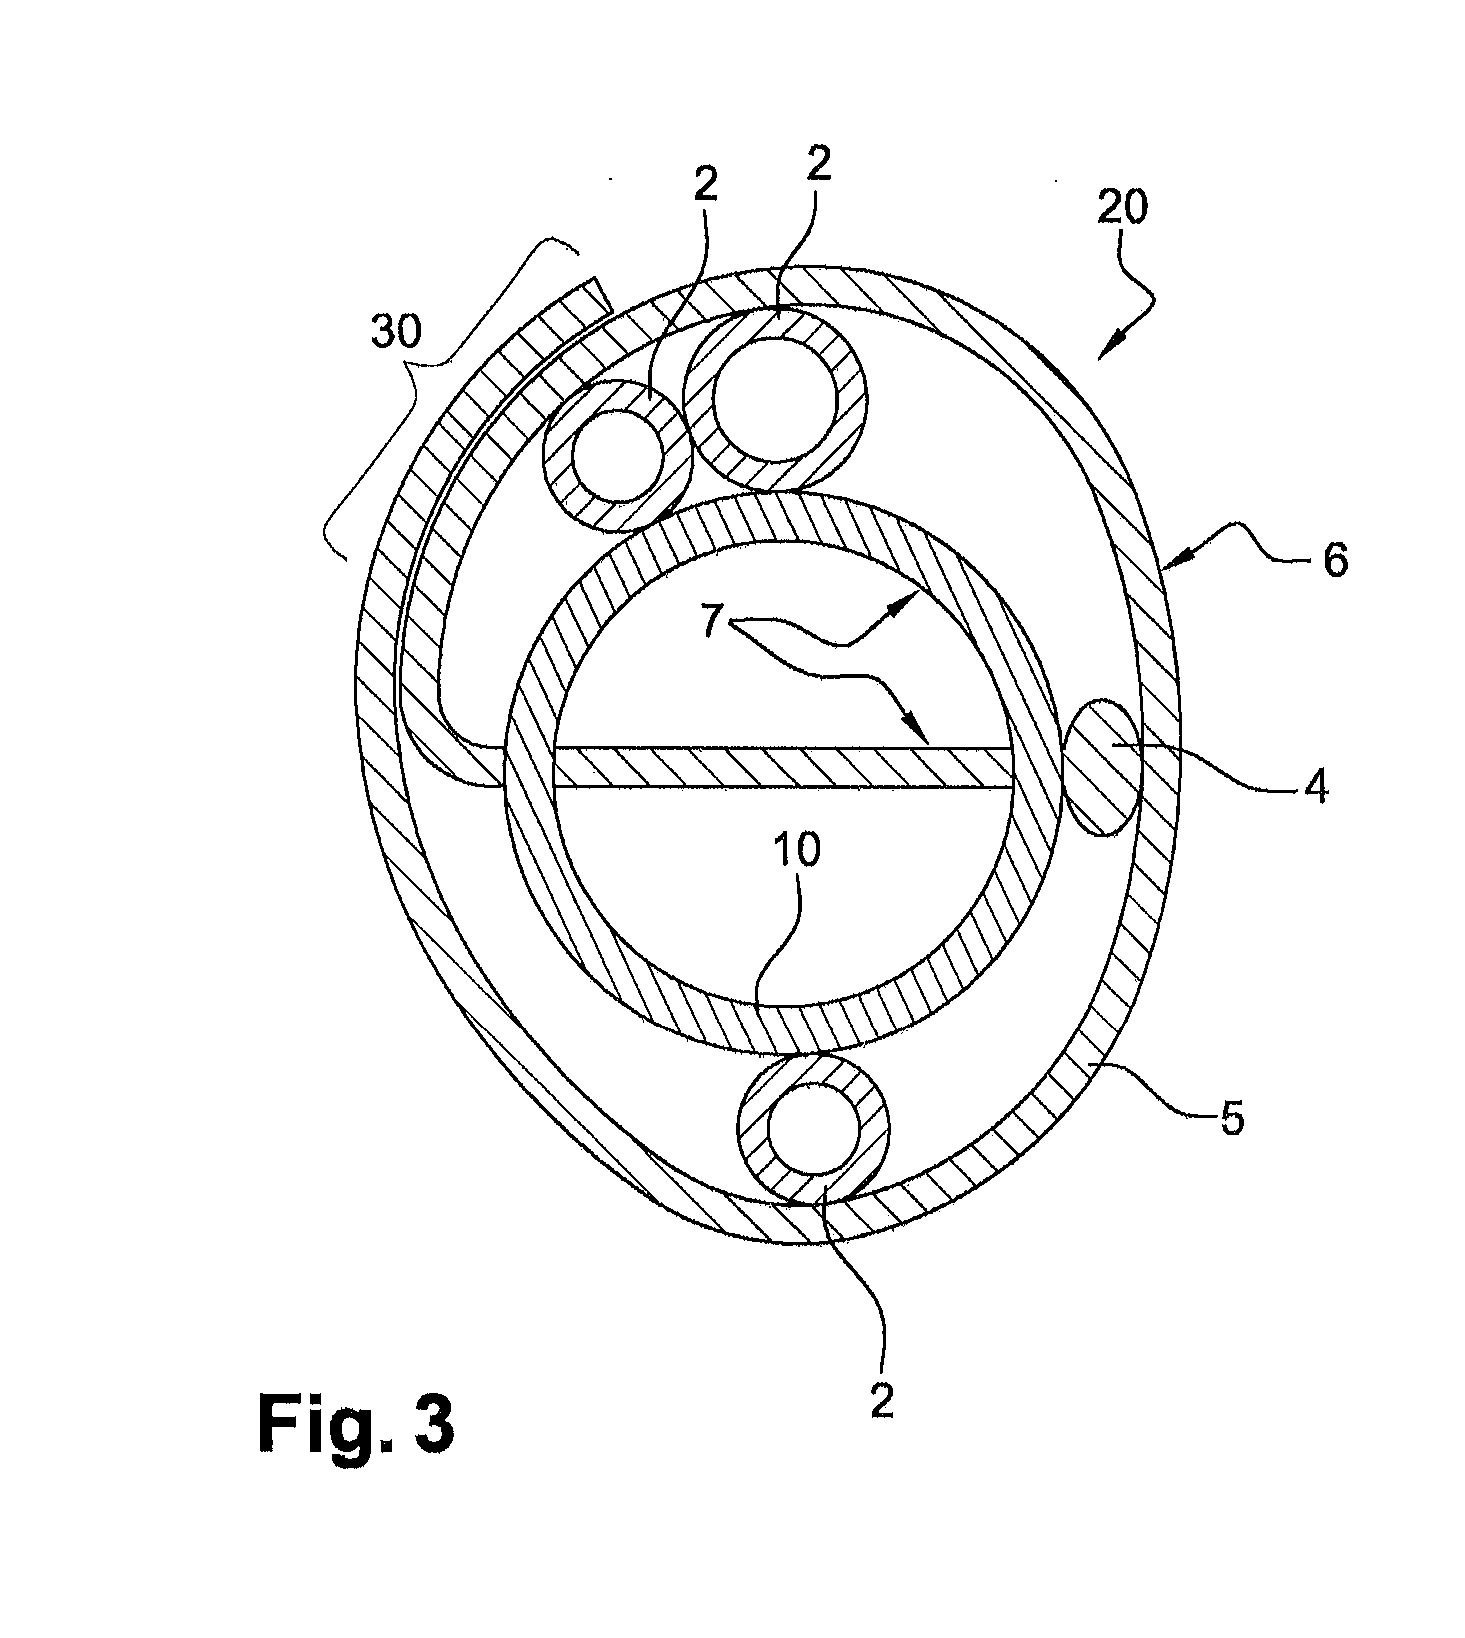 Device for securing and retaining at least one electrical harness in a turbomachine